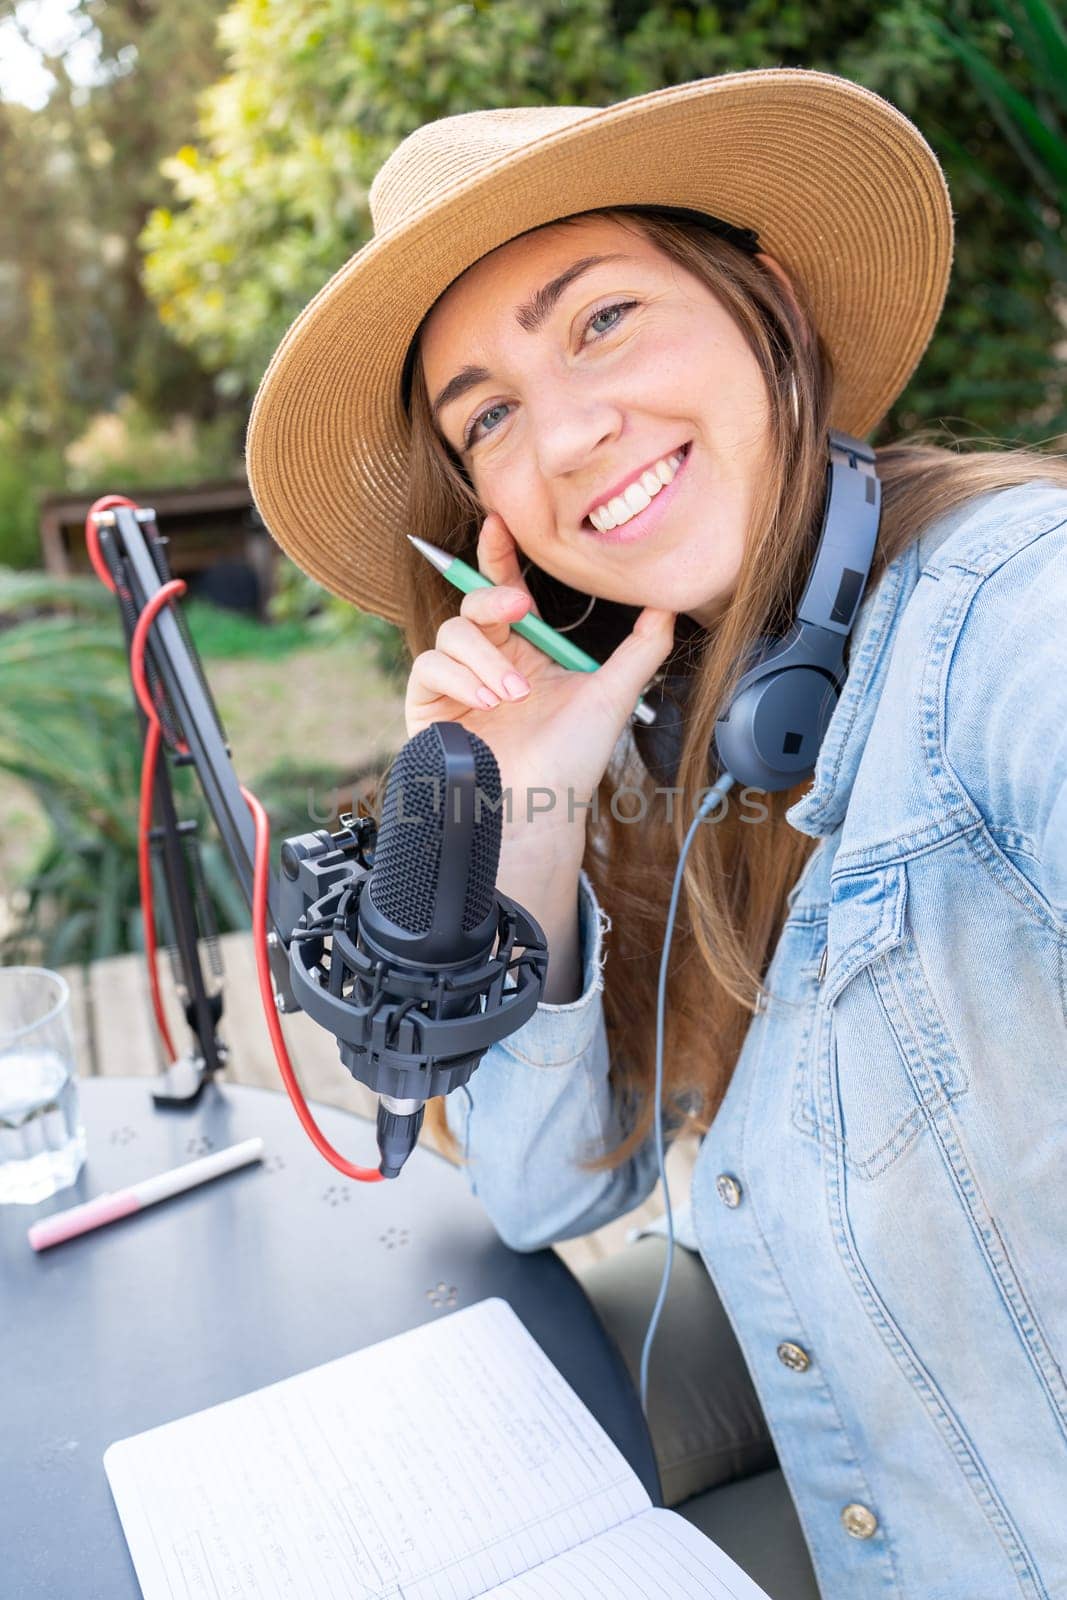 Selfie portrait happy smiling young woman with headphones recording podcast. by PaulCarr